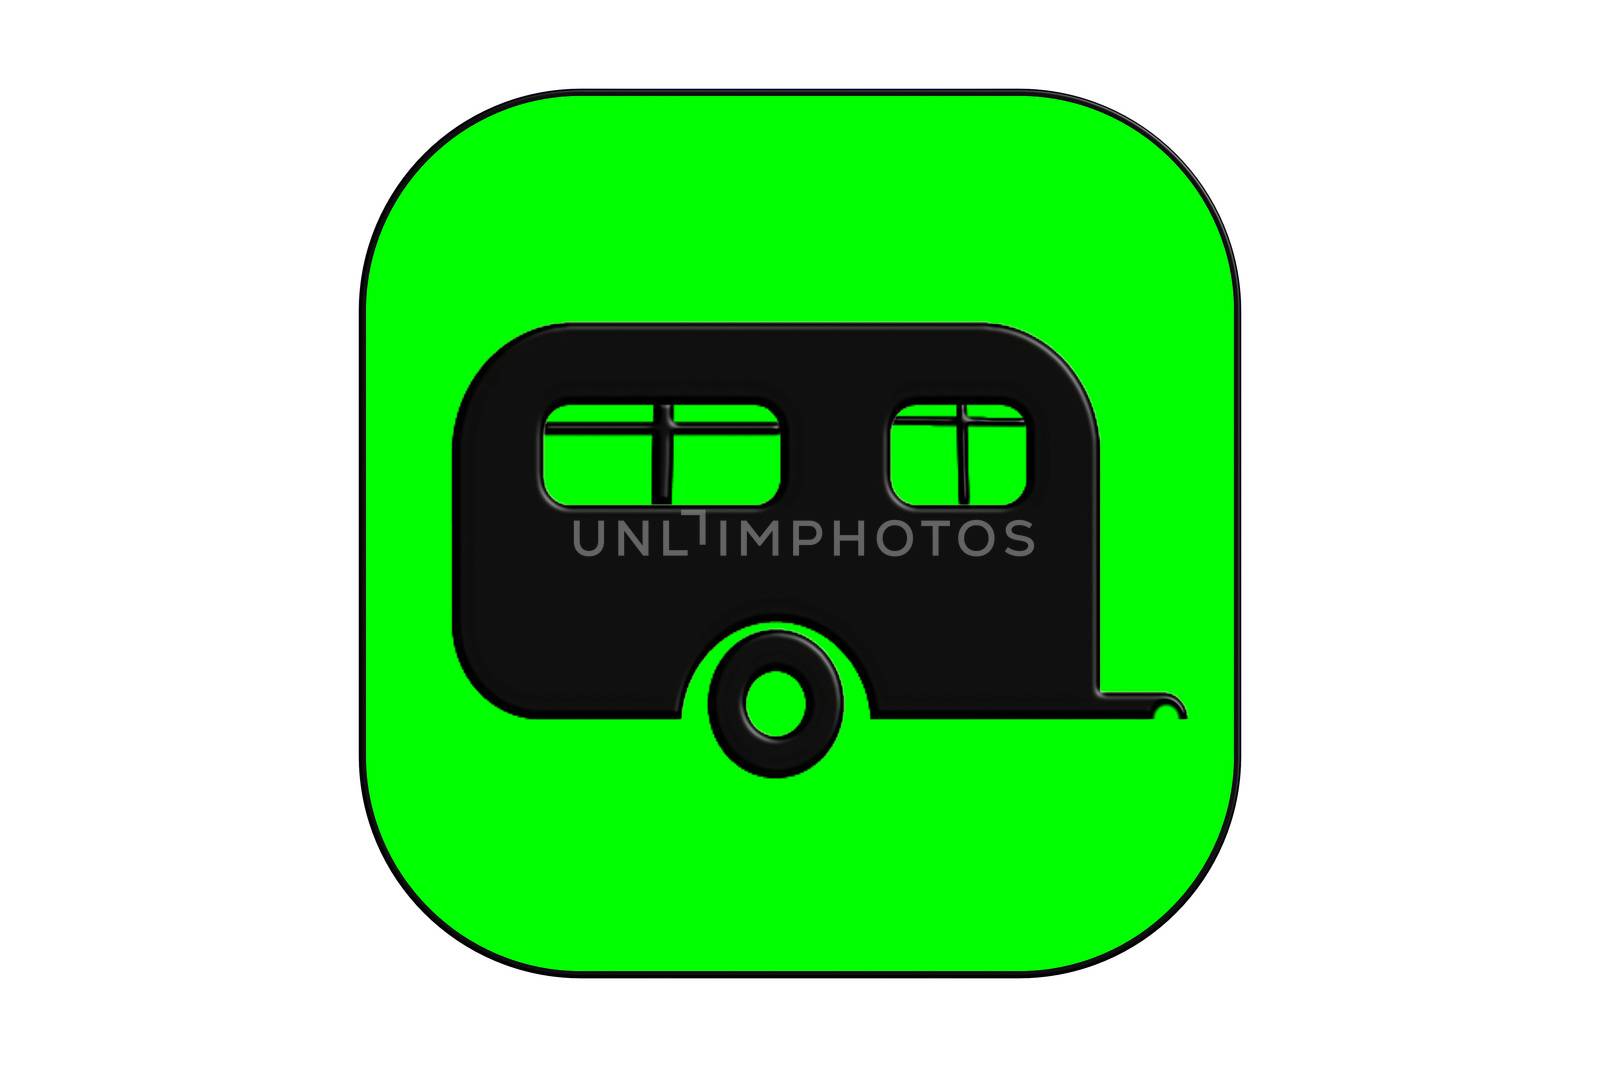 Black silhouetted RVs, campers / camping cars, truck trailers, flat design icons, isolated on green background